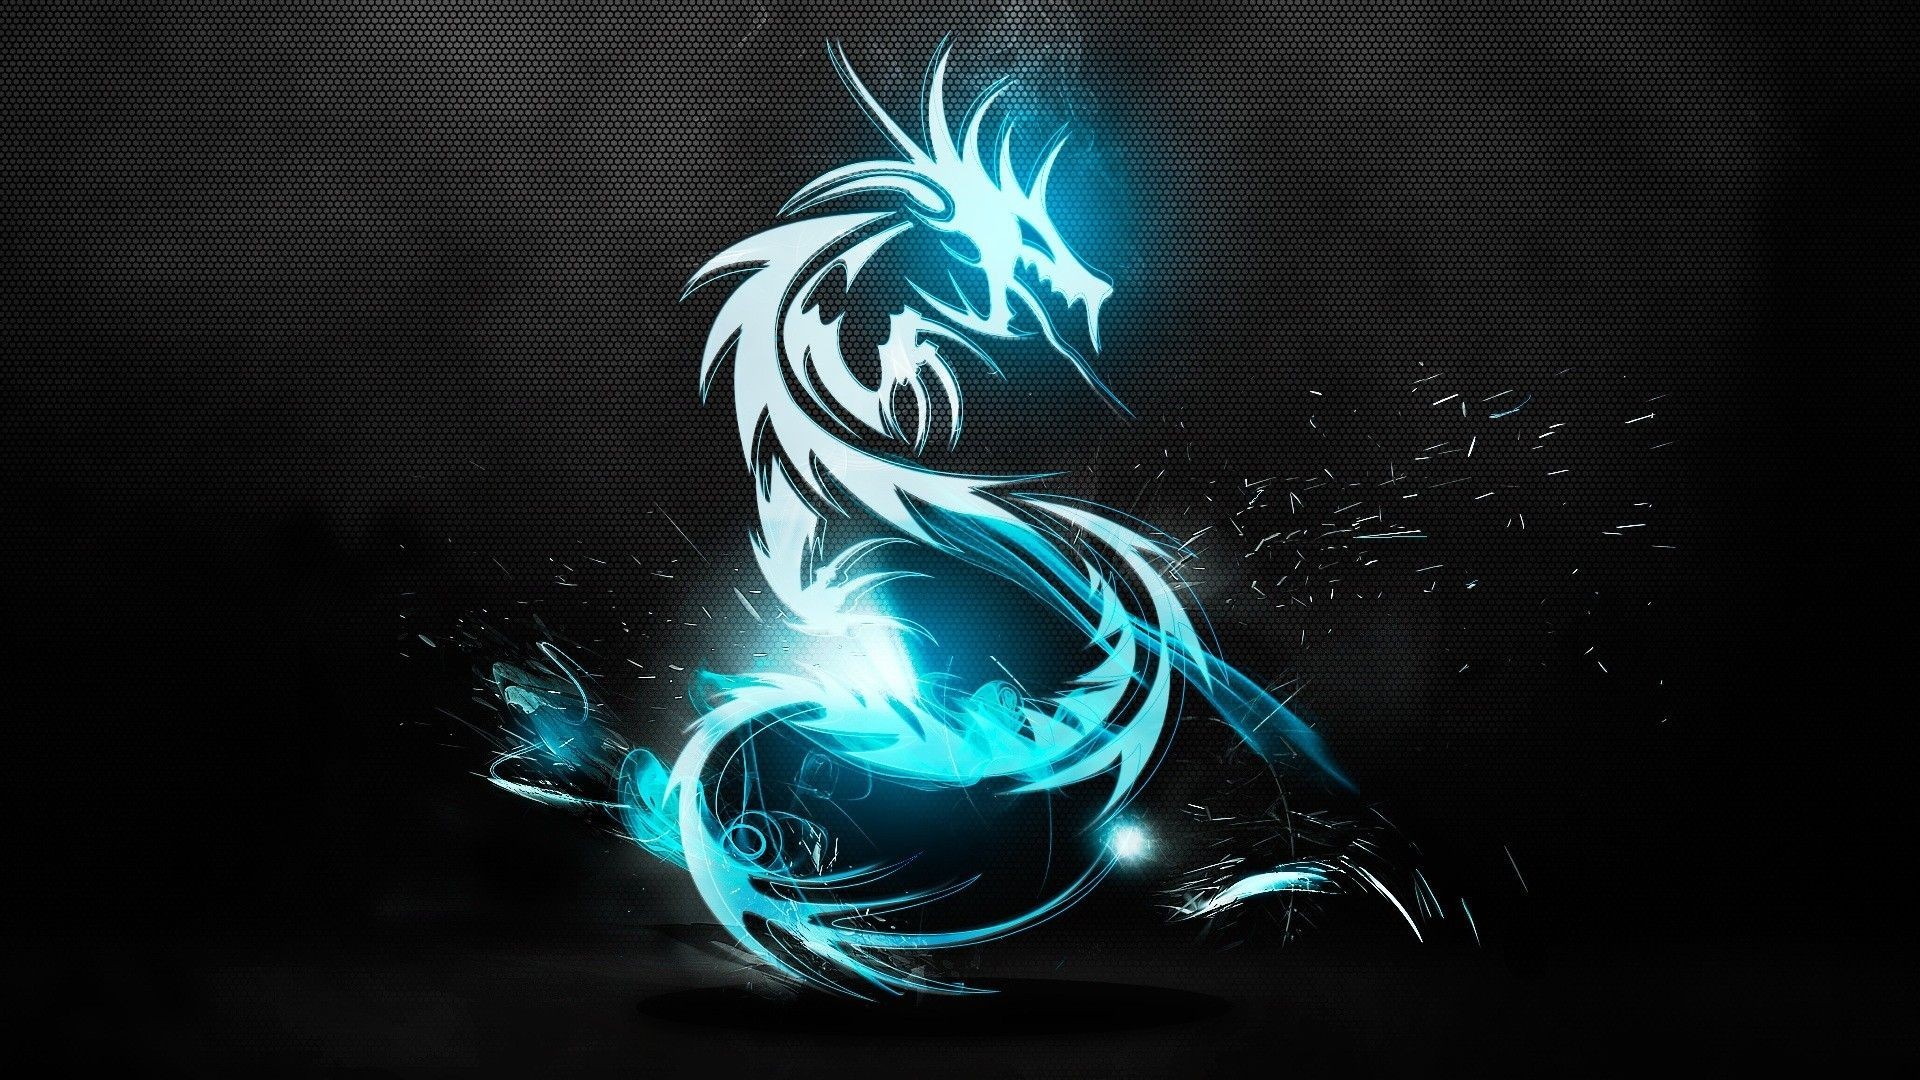 1920x1080 ... dragon msi wallpapers hd desktop and mobile backgrounds ...